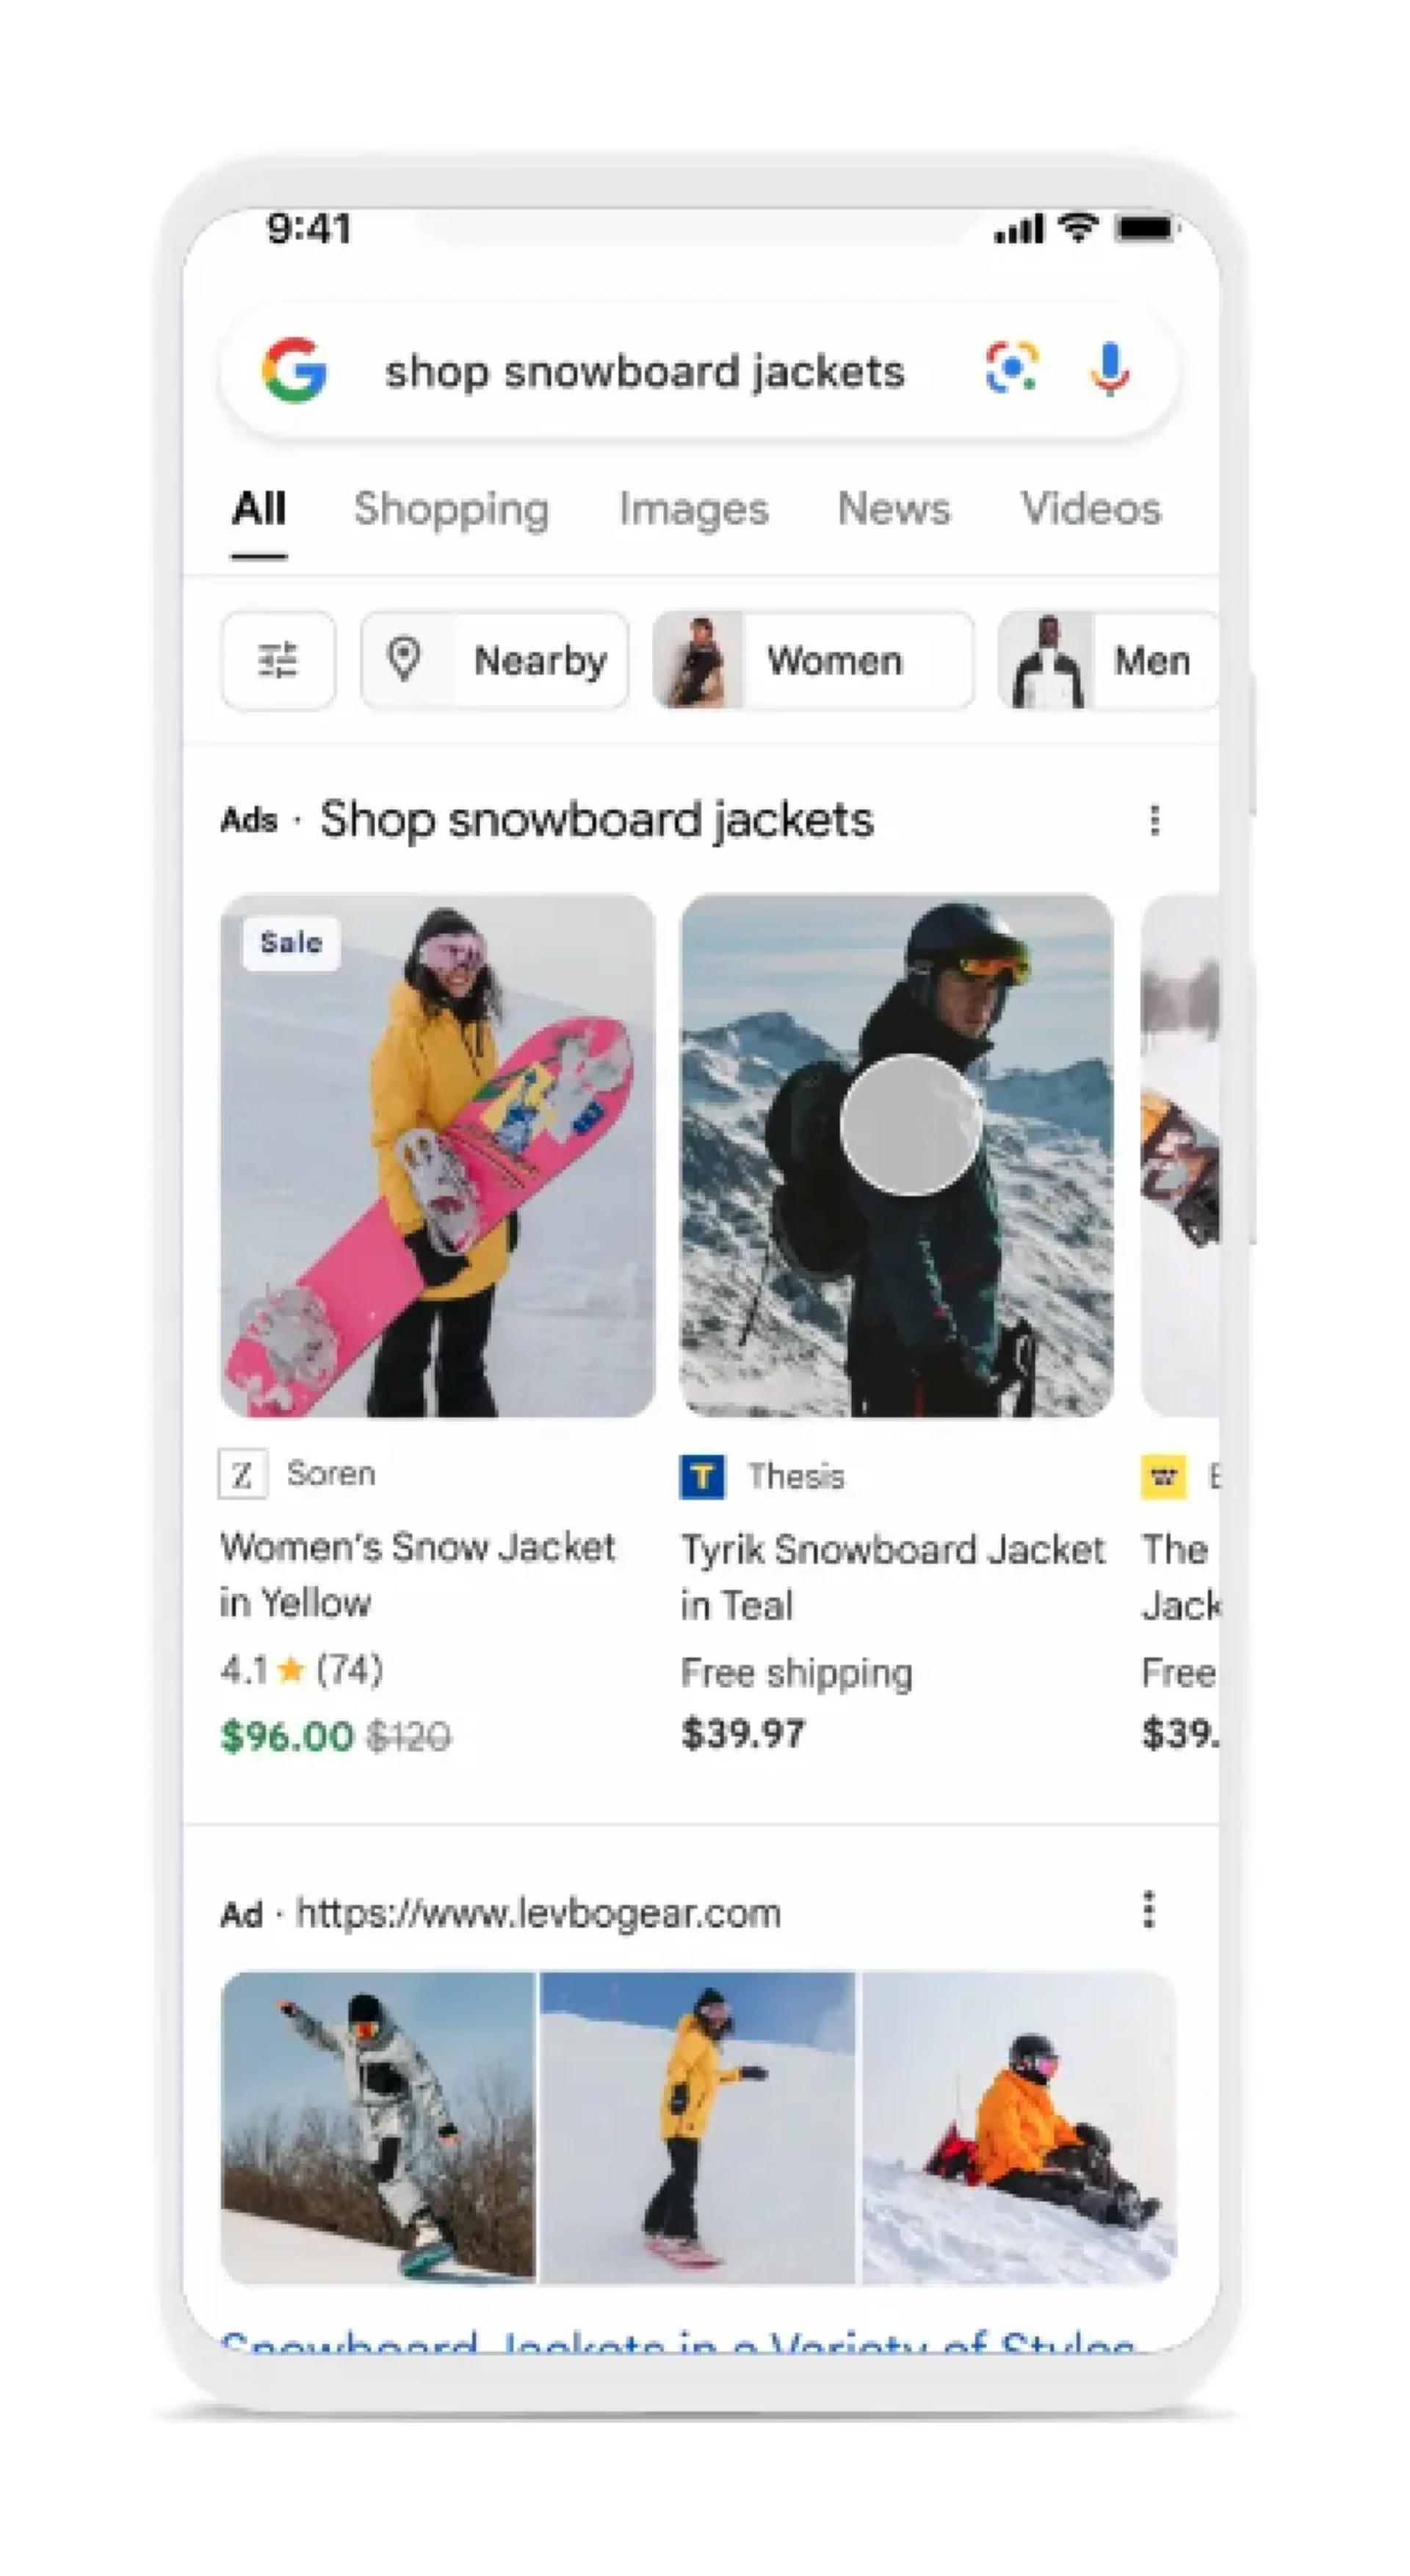 A mobile phone screen showing Google’s new visual search results for the search query “shop snowboard jackets“